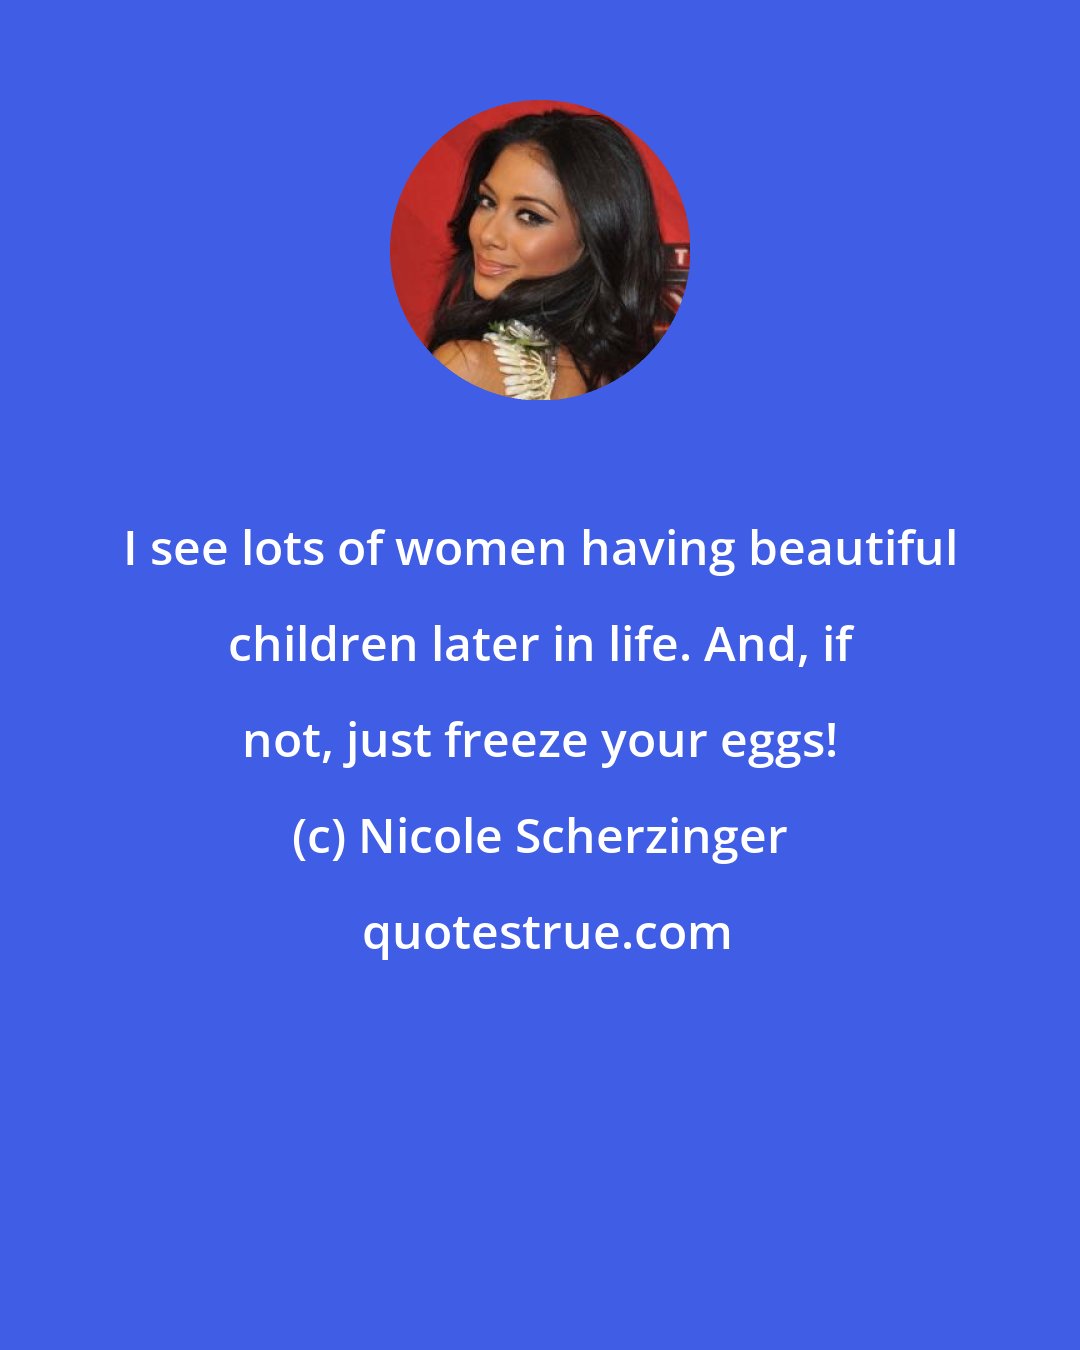 Nicole Scherzinger: I see lots of women having beautiful children later in life. And, if not, just freeze your eggs!